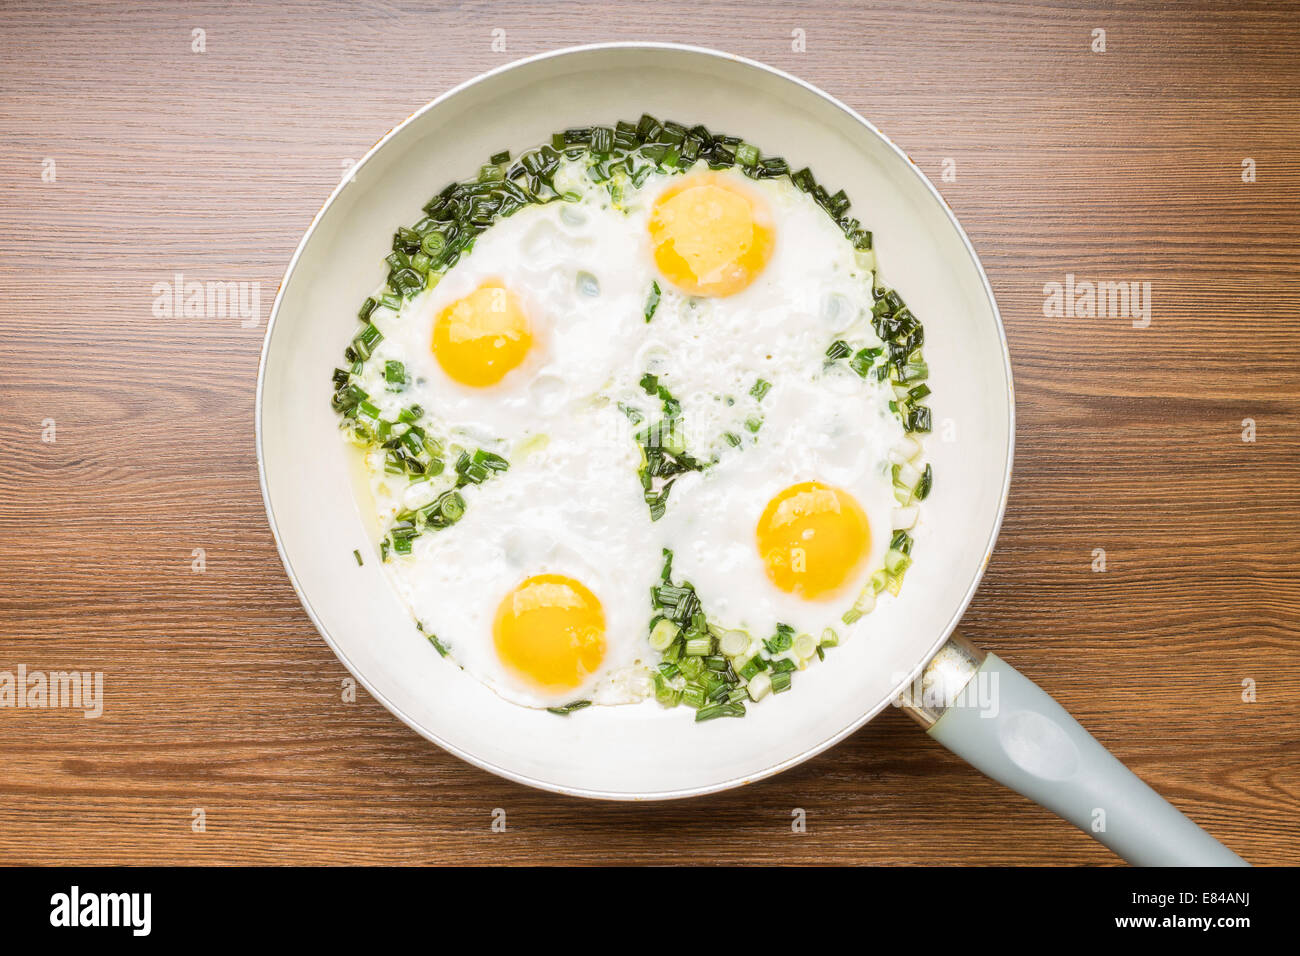 4 four fried egg yolks in frying pan Stock Photo - Alamy